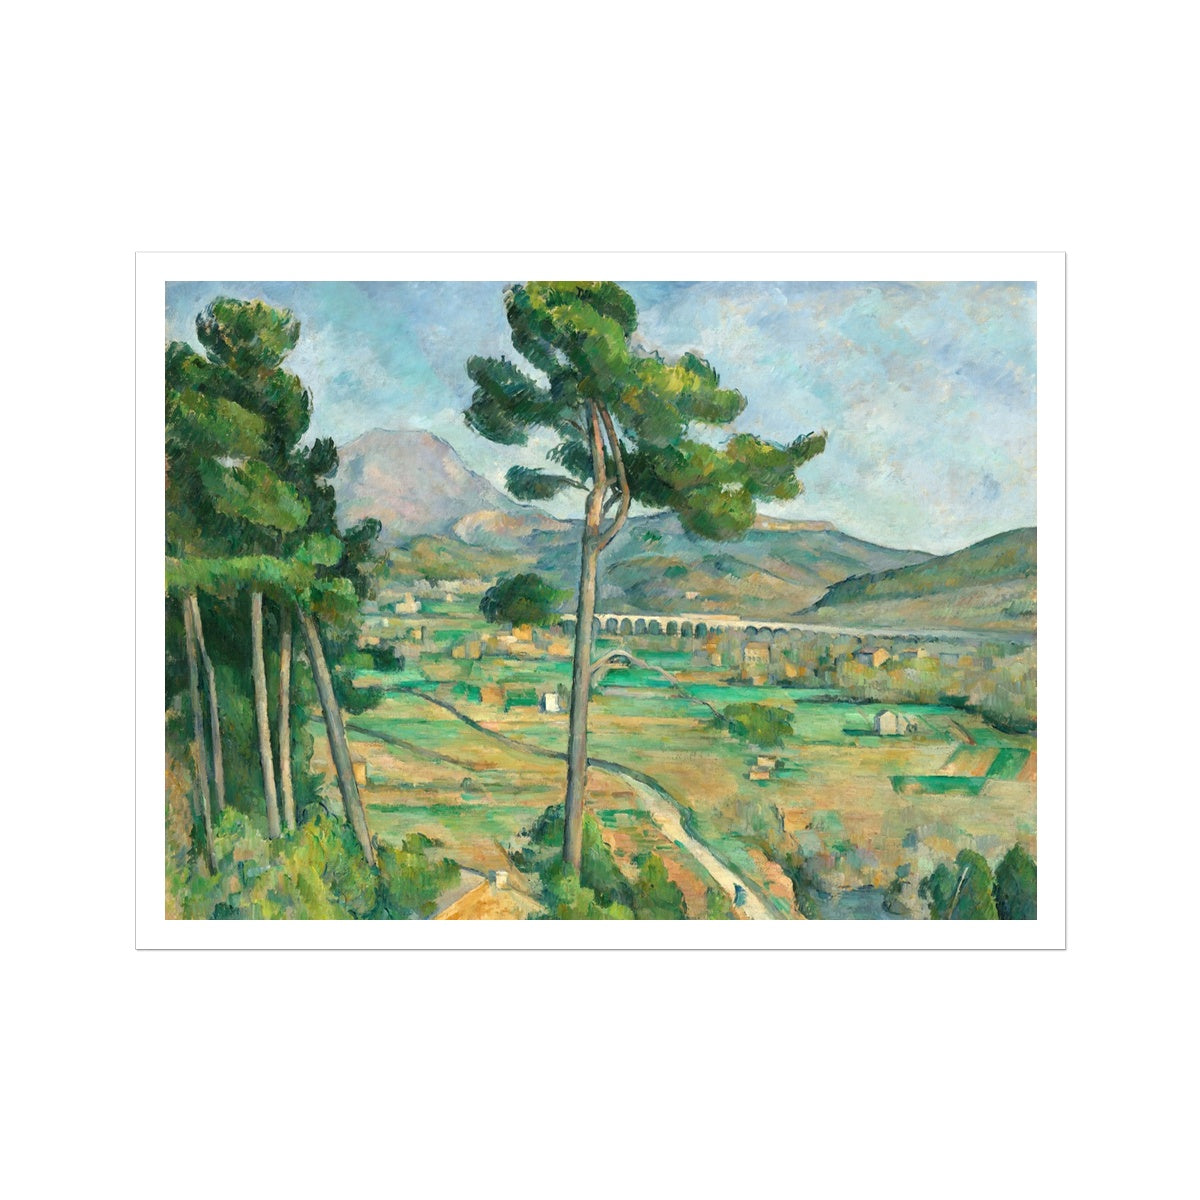 'Mont Sainte-Victoire and the Viaduct of the Arc River Valley' by Paul Cézanne. Open Edition Fine Art Print. Historic Art